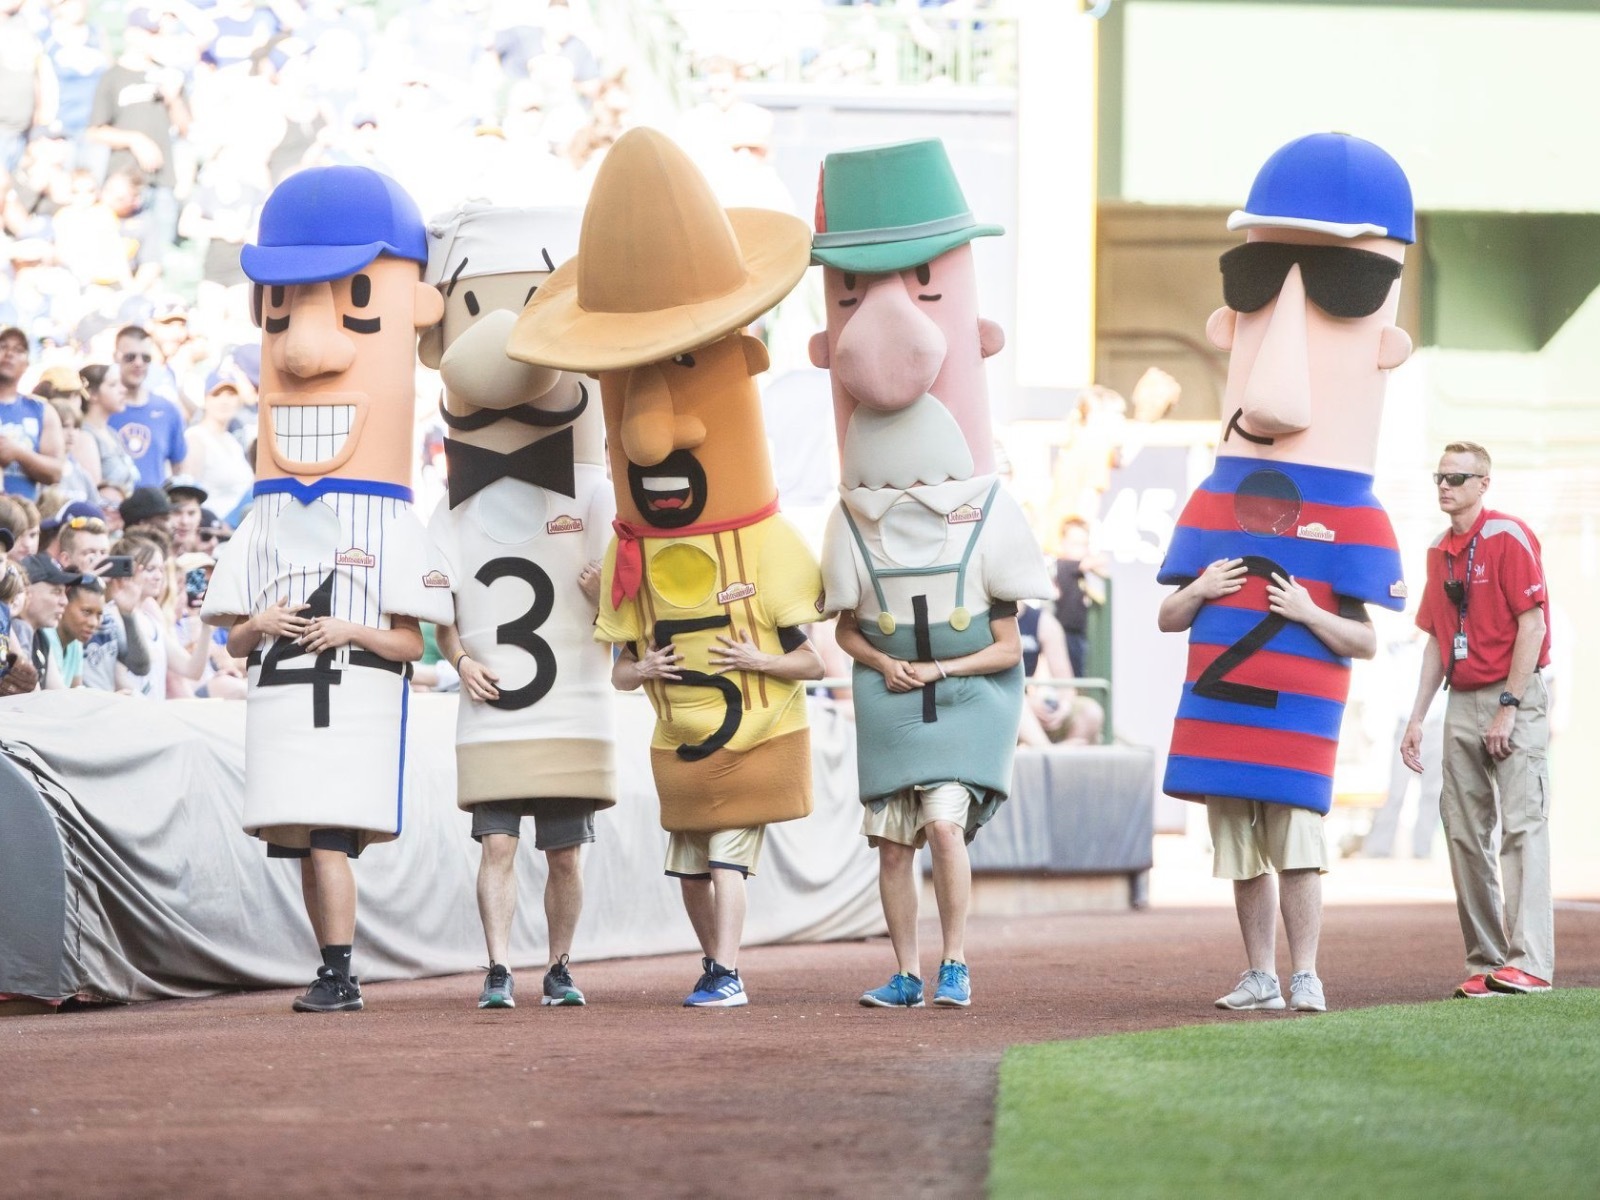 Why the Racing Sausages won't be running in person at Brewers games